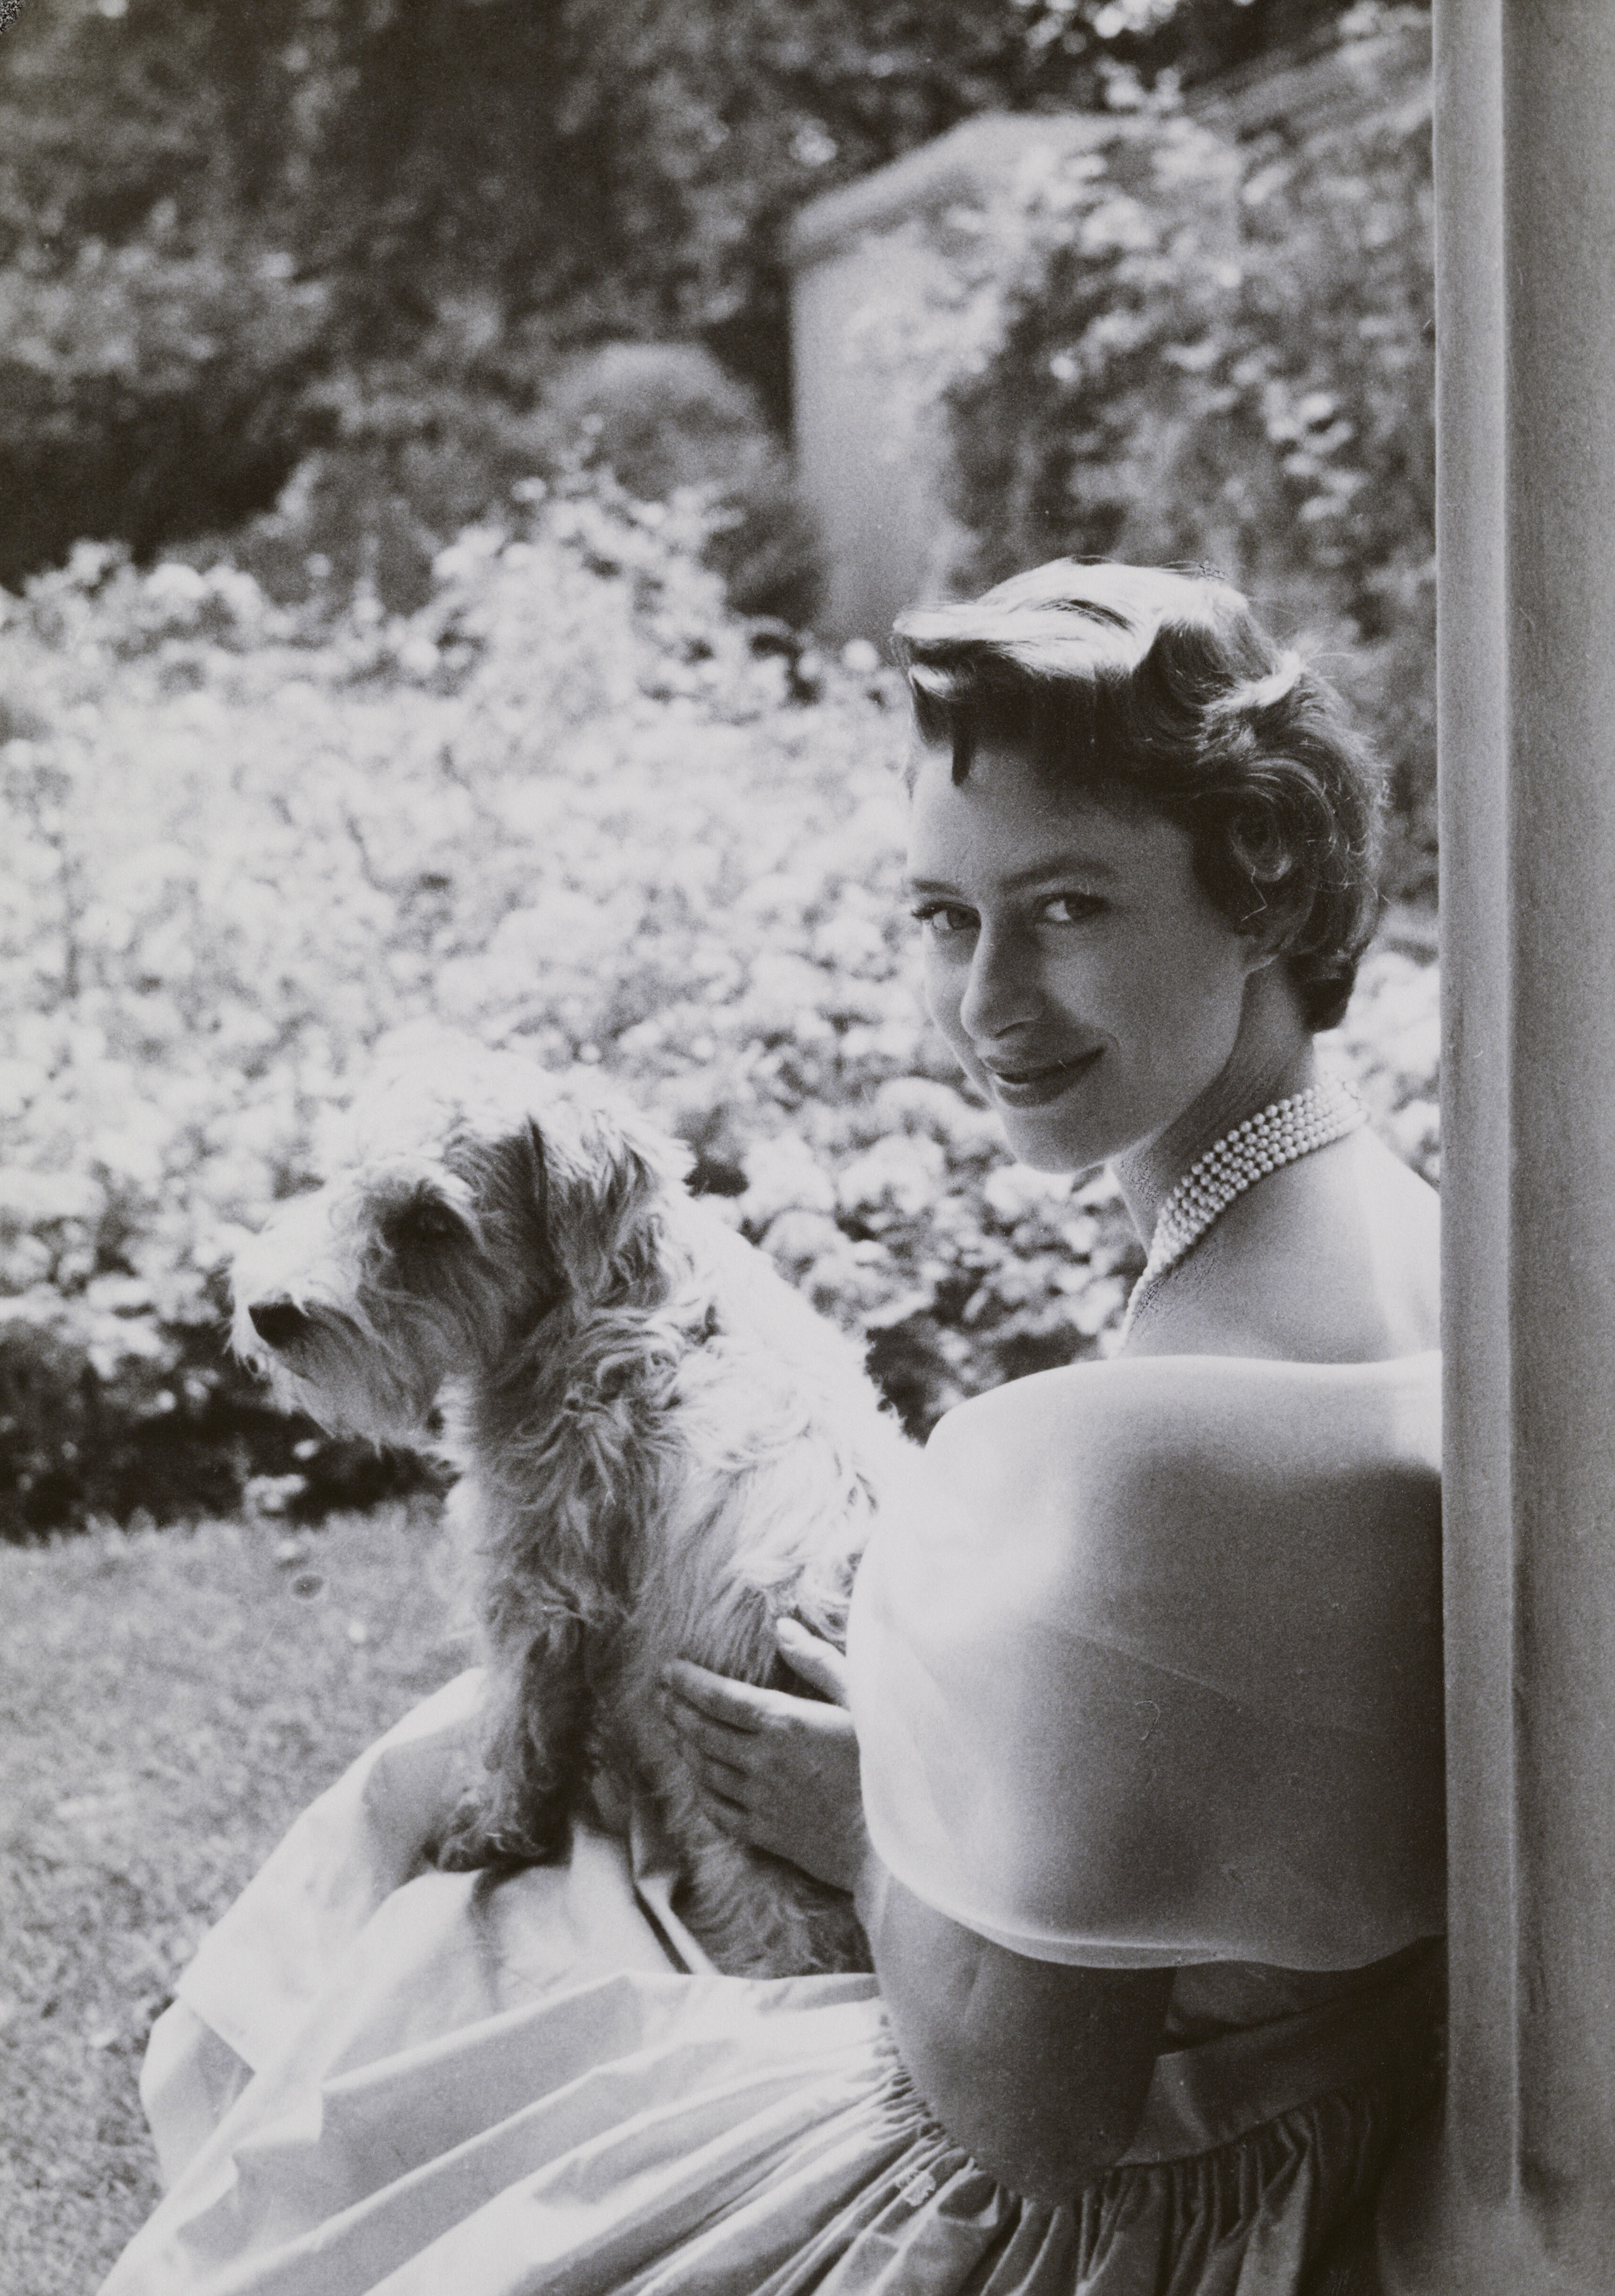 A black and white 25th-birthday portrait of Princess Margaret with her dog Pippin in her lap